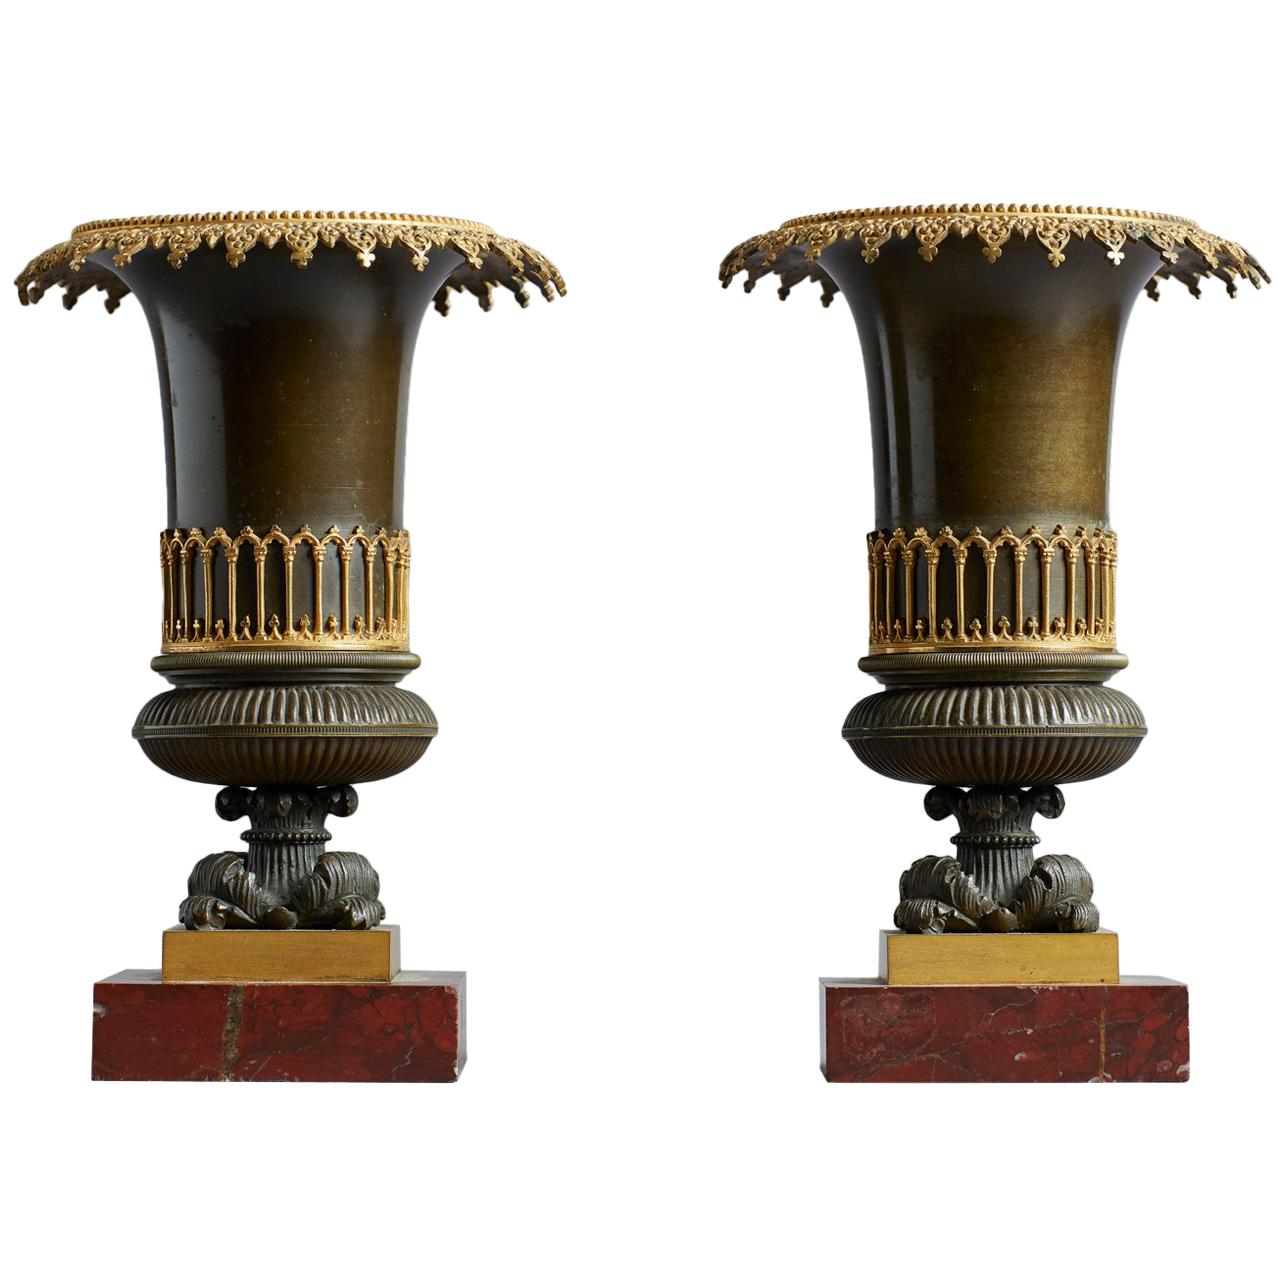 Pair of French Early 19th Century Restauration Gothic Revival Bronze Urns Vases For Sale